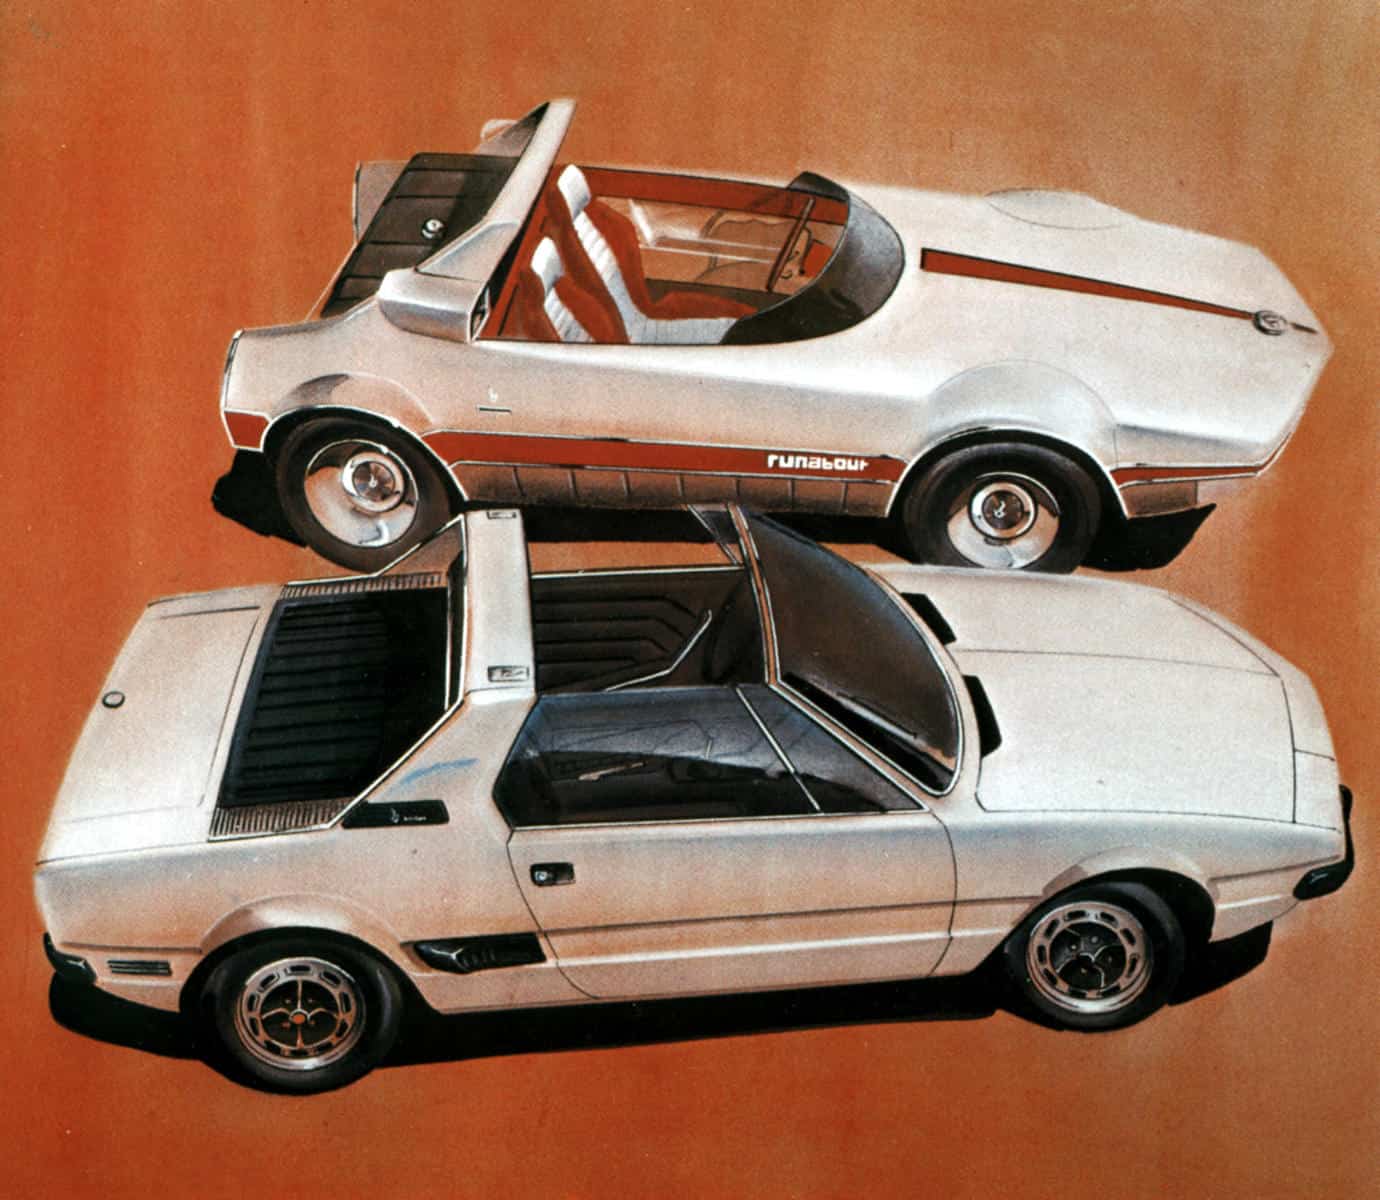 A Mid-Engine for the Masses - The impressive saga of the Fiat X1/9